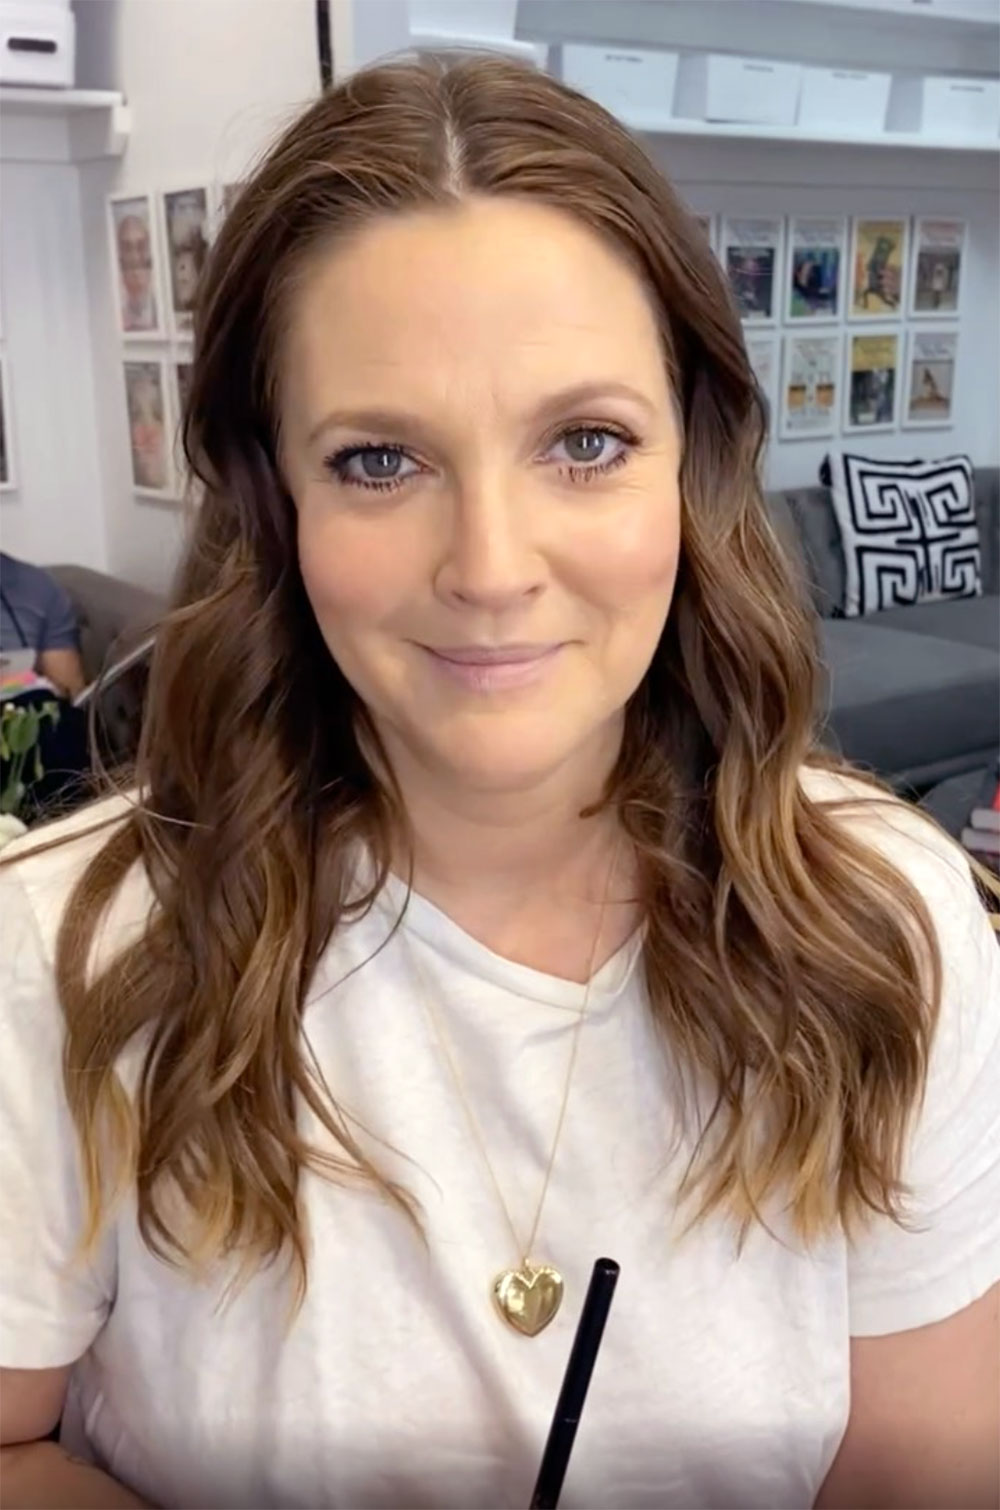 Fans Are Saying Drew Barrymore’s $9 Makeup Hack Is Better Than Botox